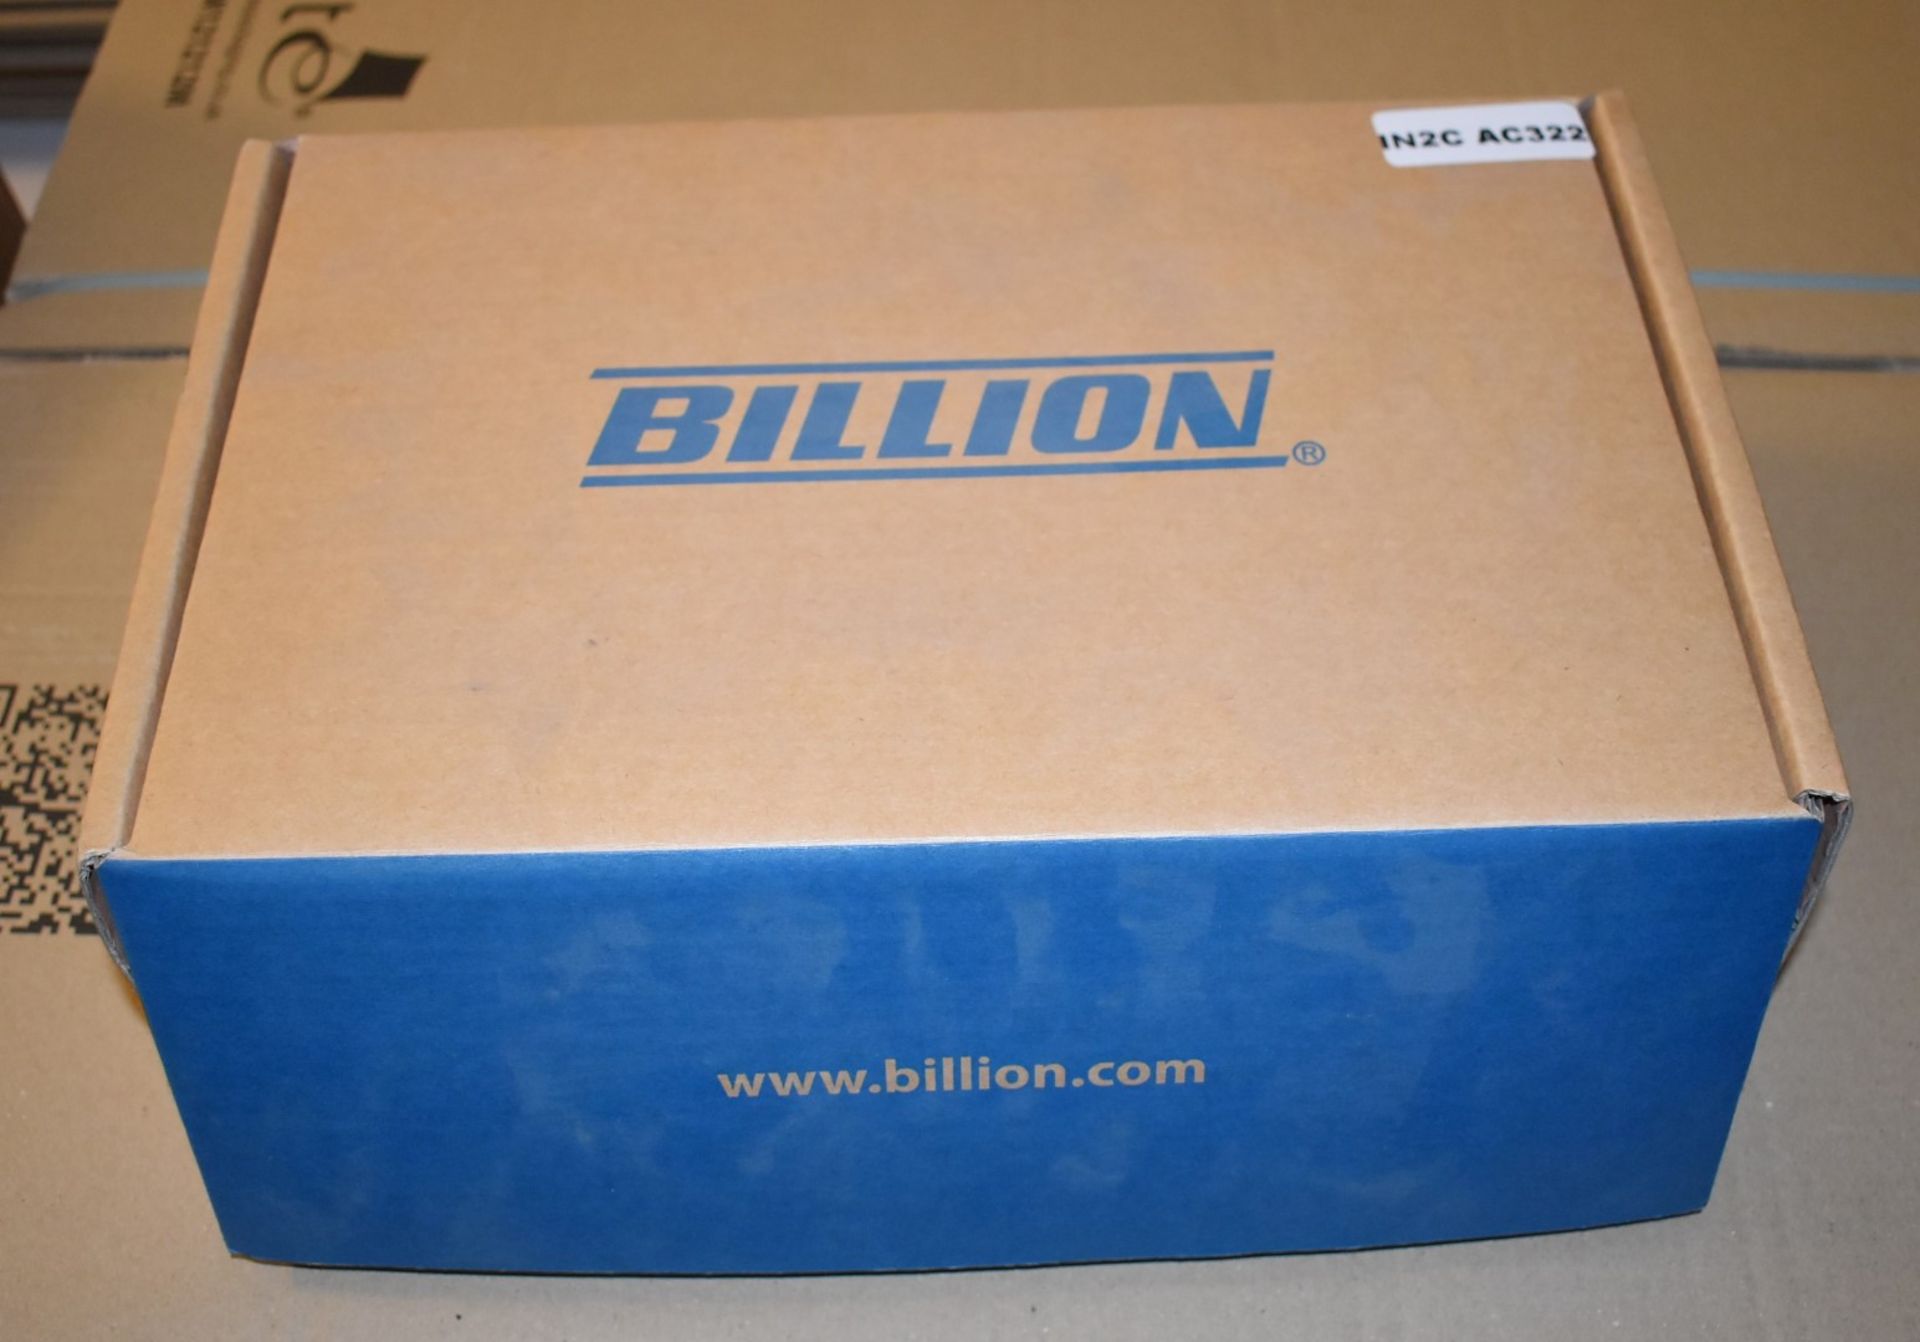 1 x Billion Wireless AC 1600Mbps 3G/4G LTE VPN Firewall Router - Model BiPAC 8900AX-1600 R2 - New - Image 5 of 5